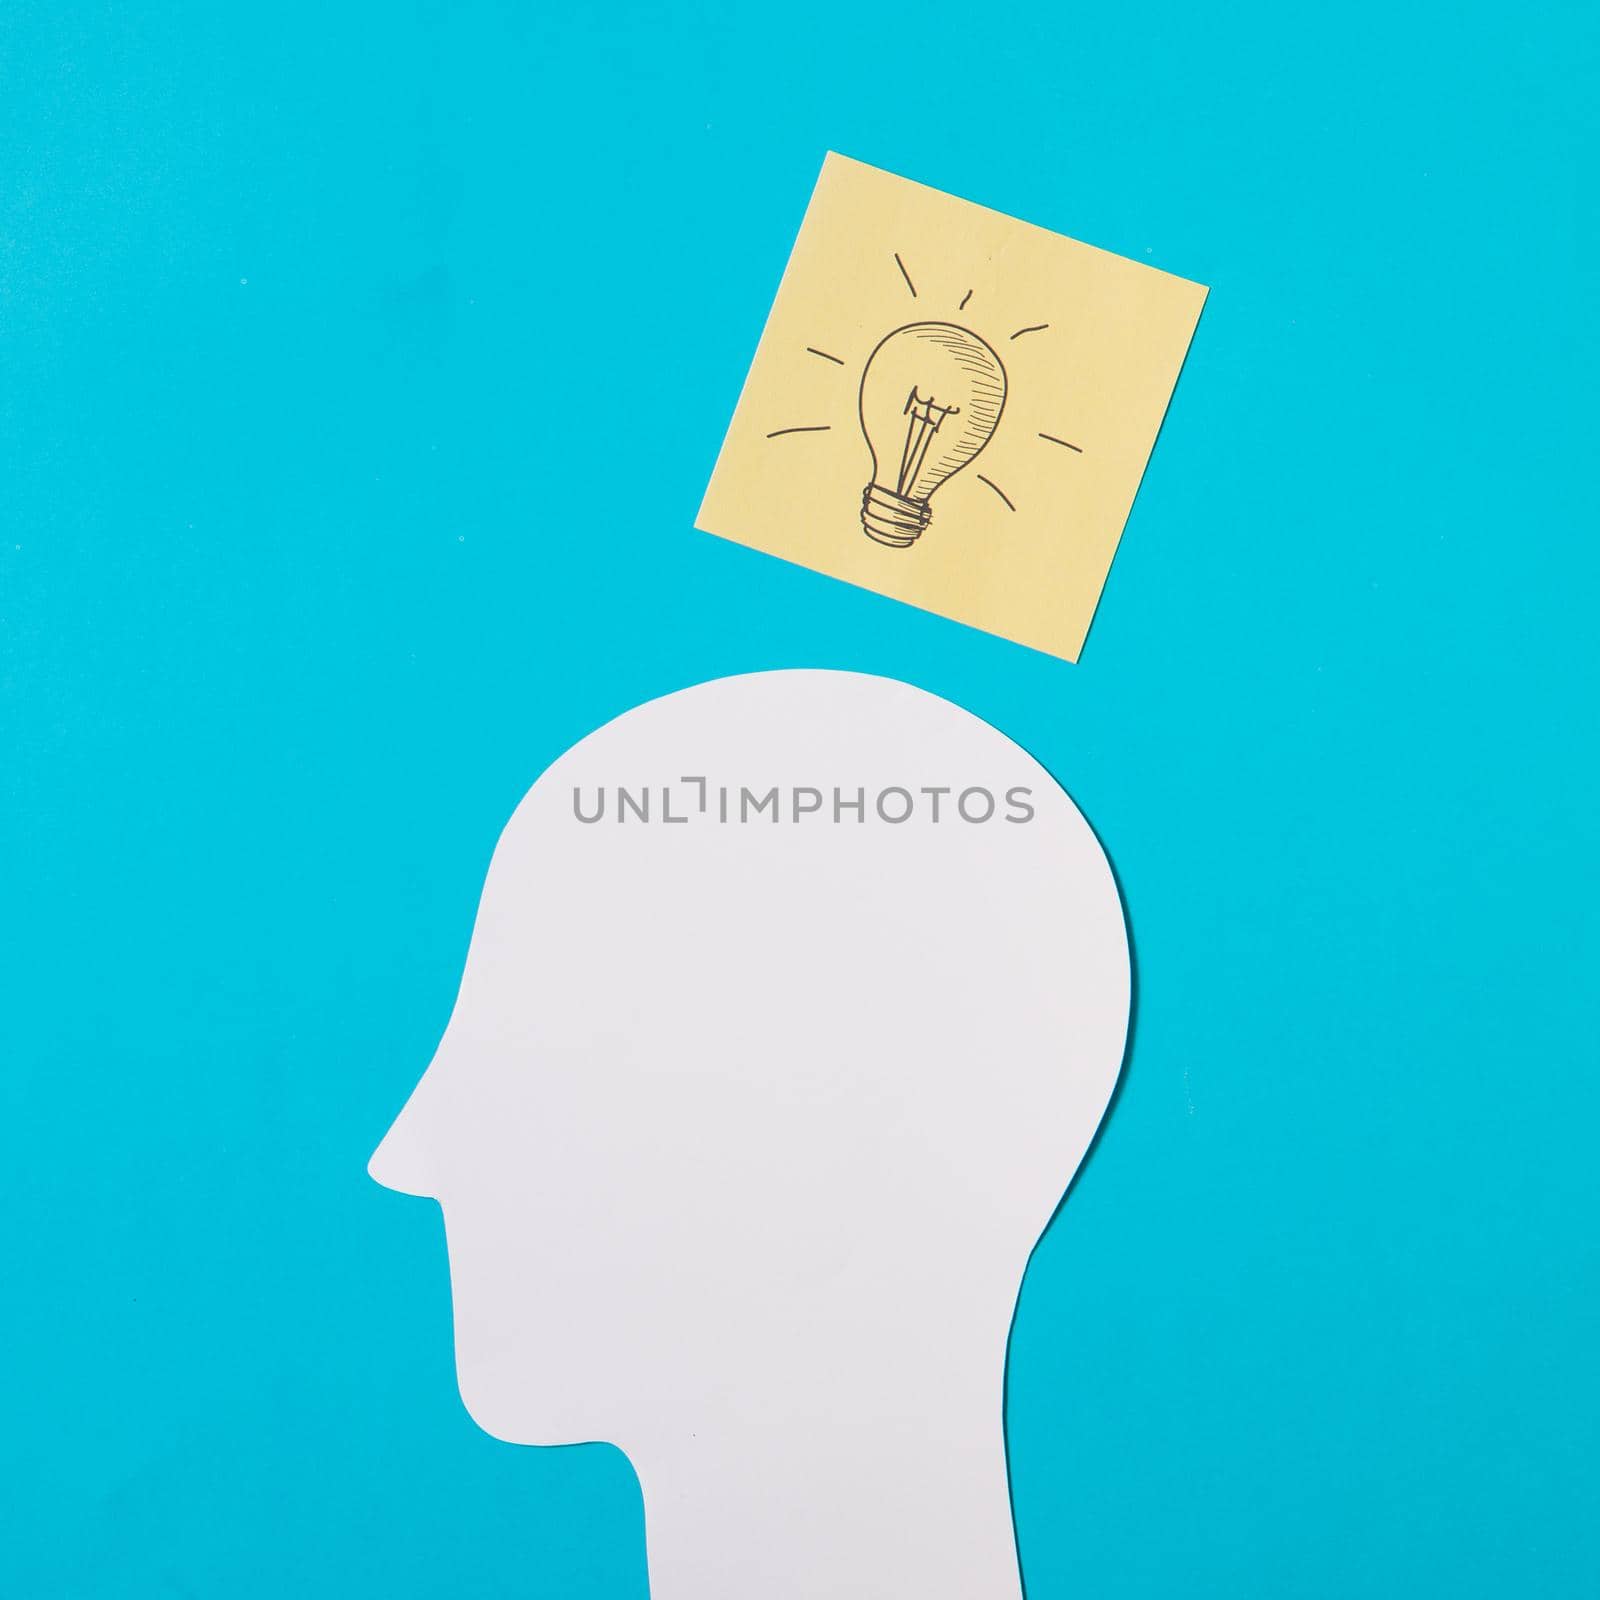 drawn light bulb icon sticky note paper cut out head against blue background. High quality beautiful photo concept by Zahard